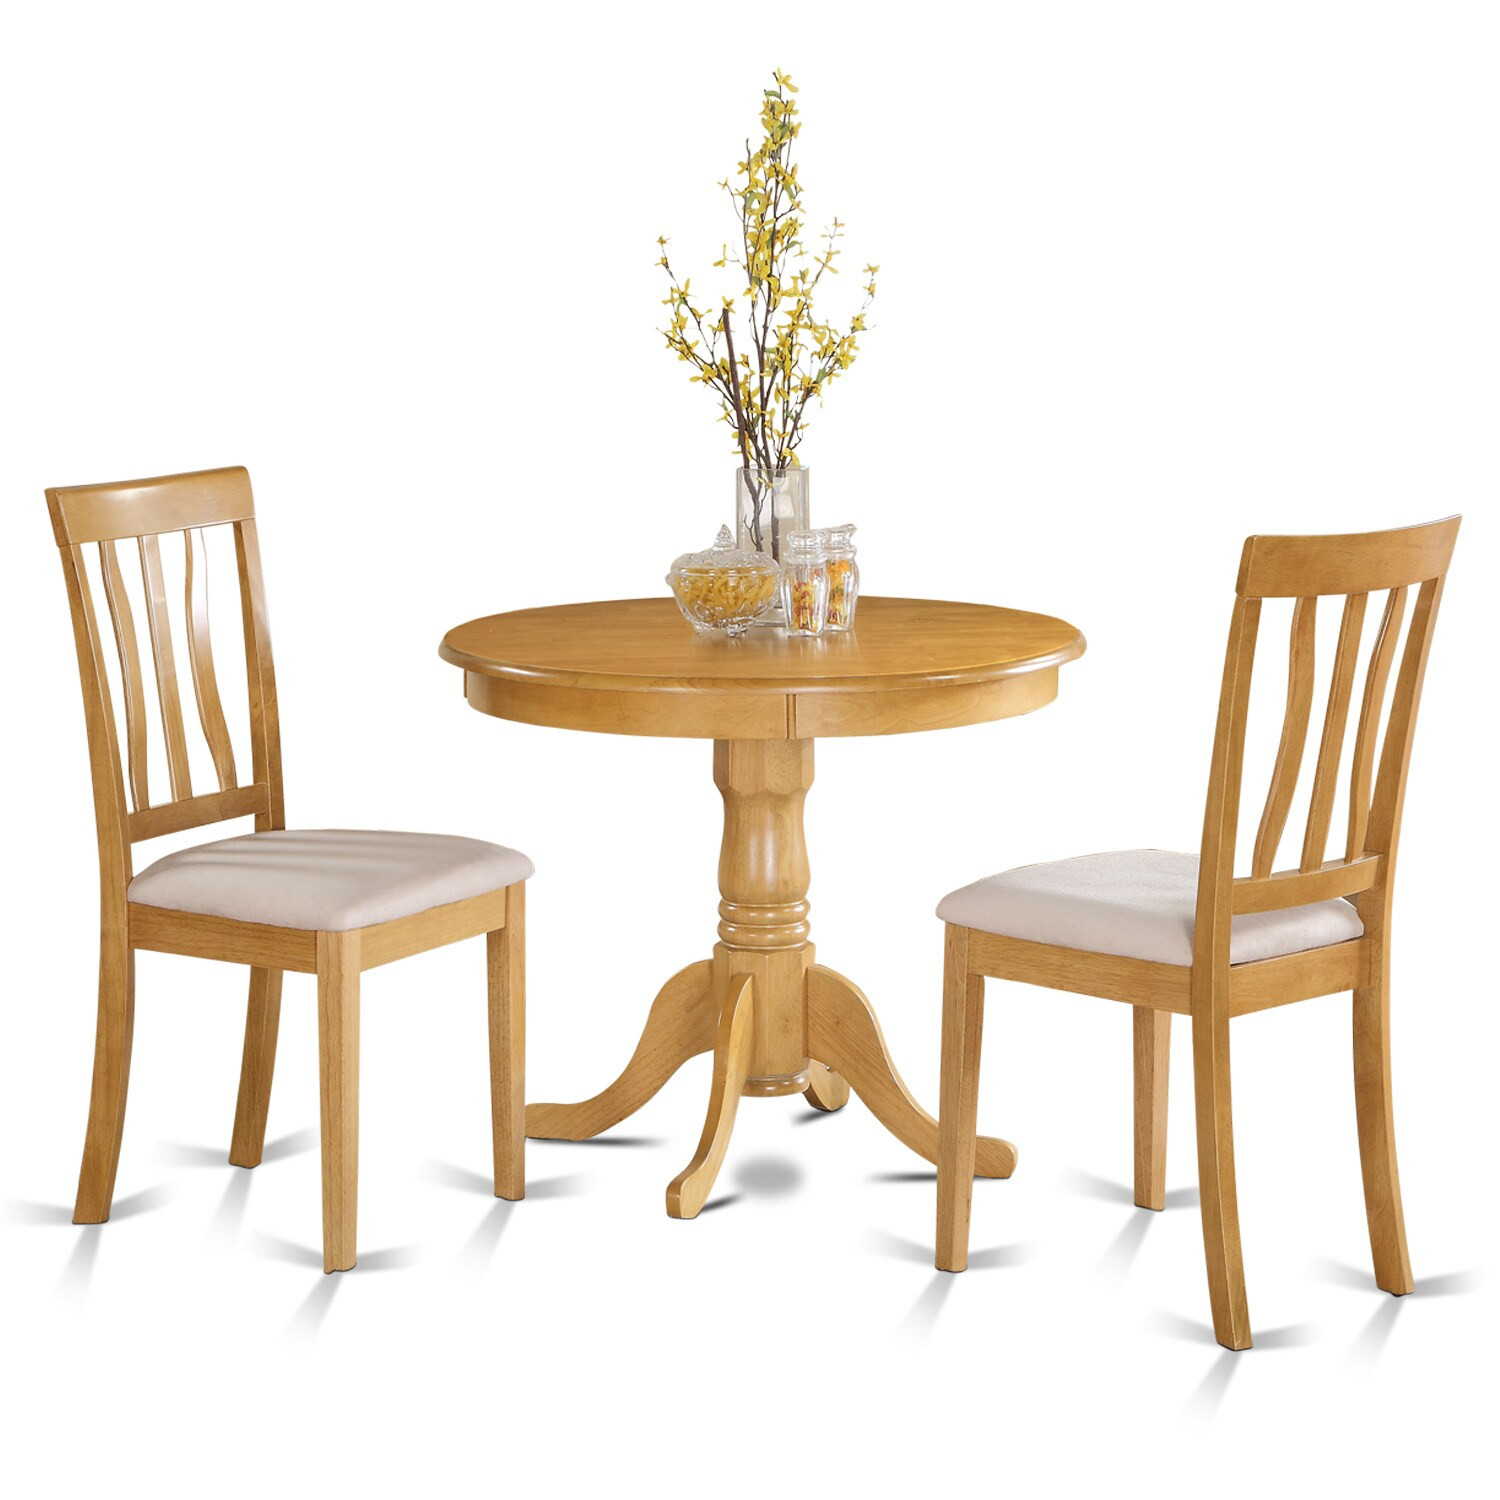 Small Kitchen Tables Sets
 Oak Small Kitchen Table Plus 2 Chairs 3 piece Dining Set